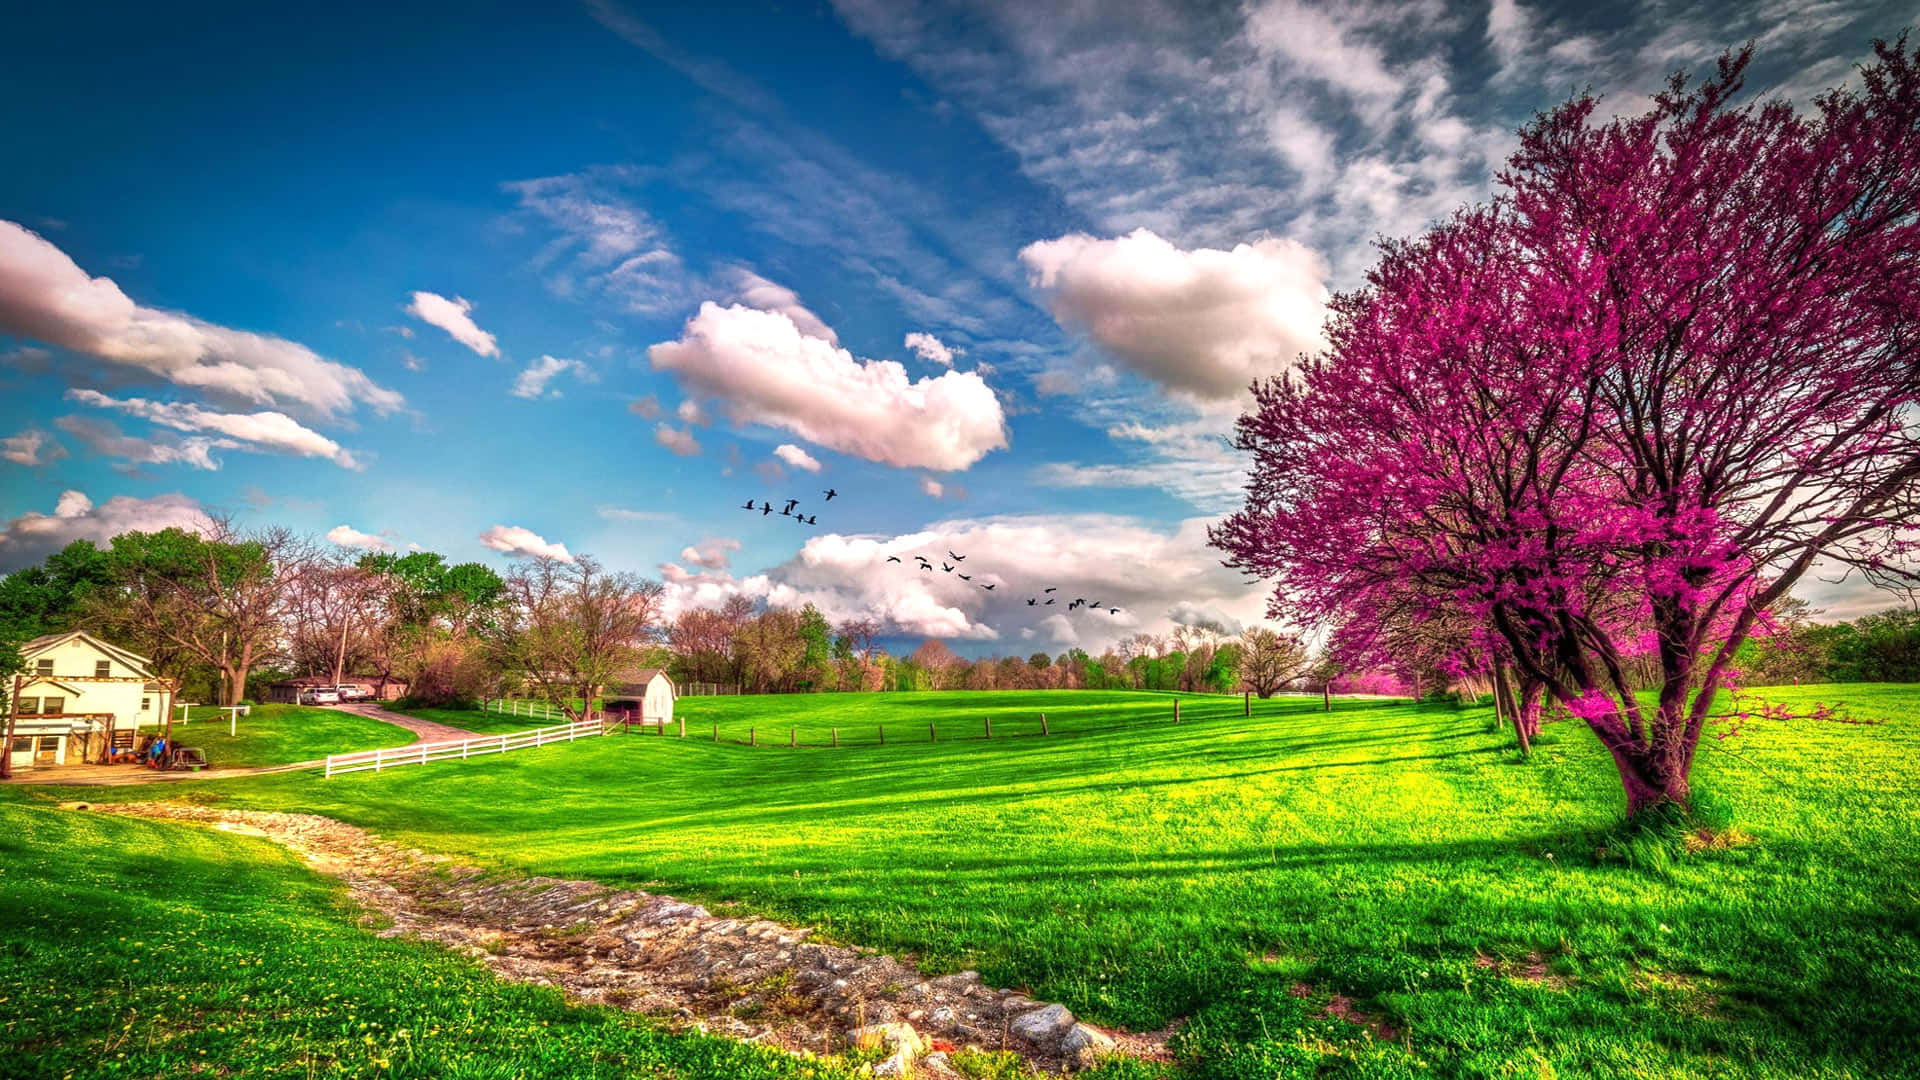 Enjoy the beautiful colors of spring with this gorgeous Cute Spring Desktop wallpaper Wallpaper